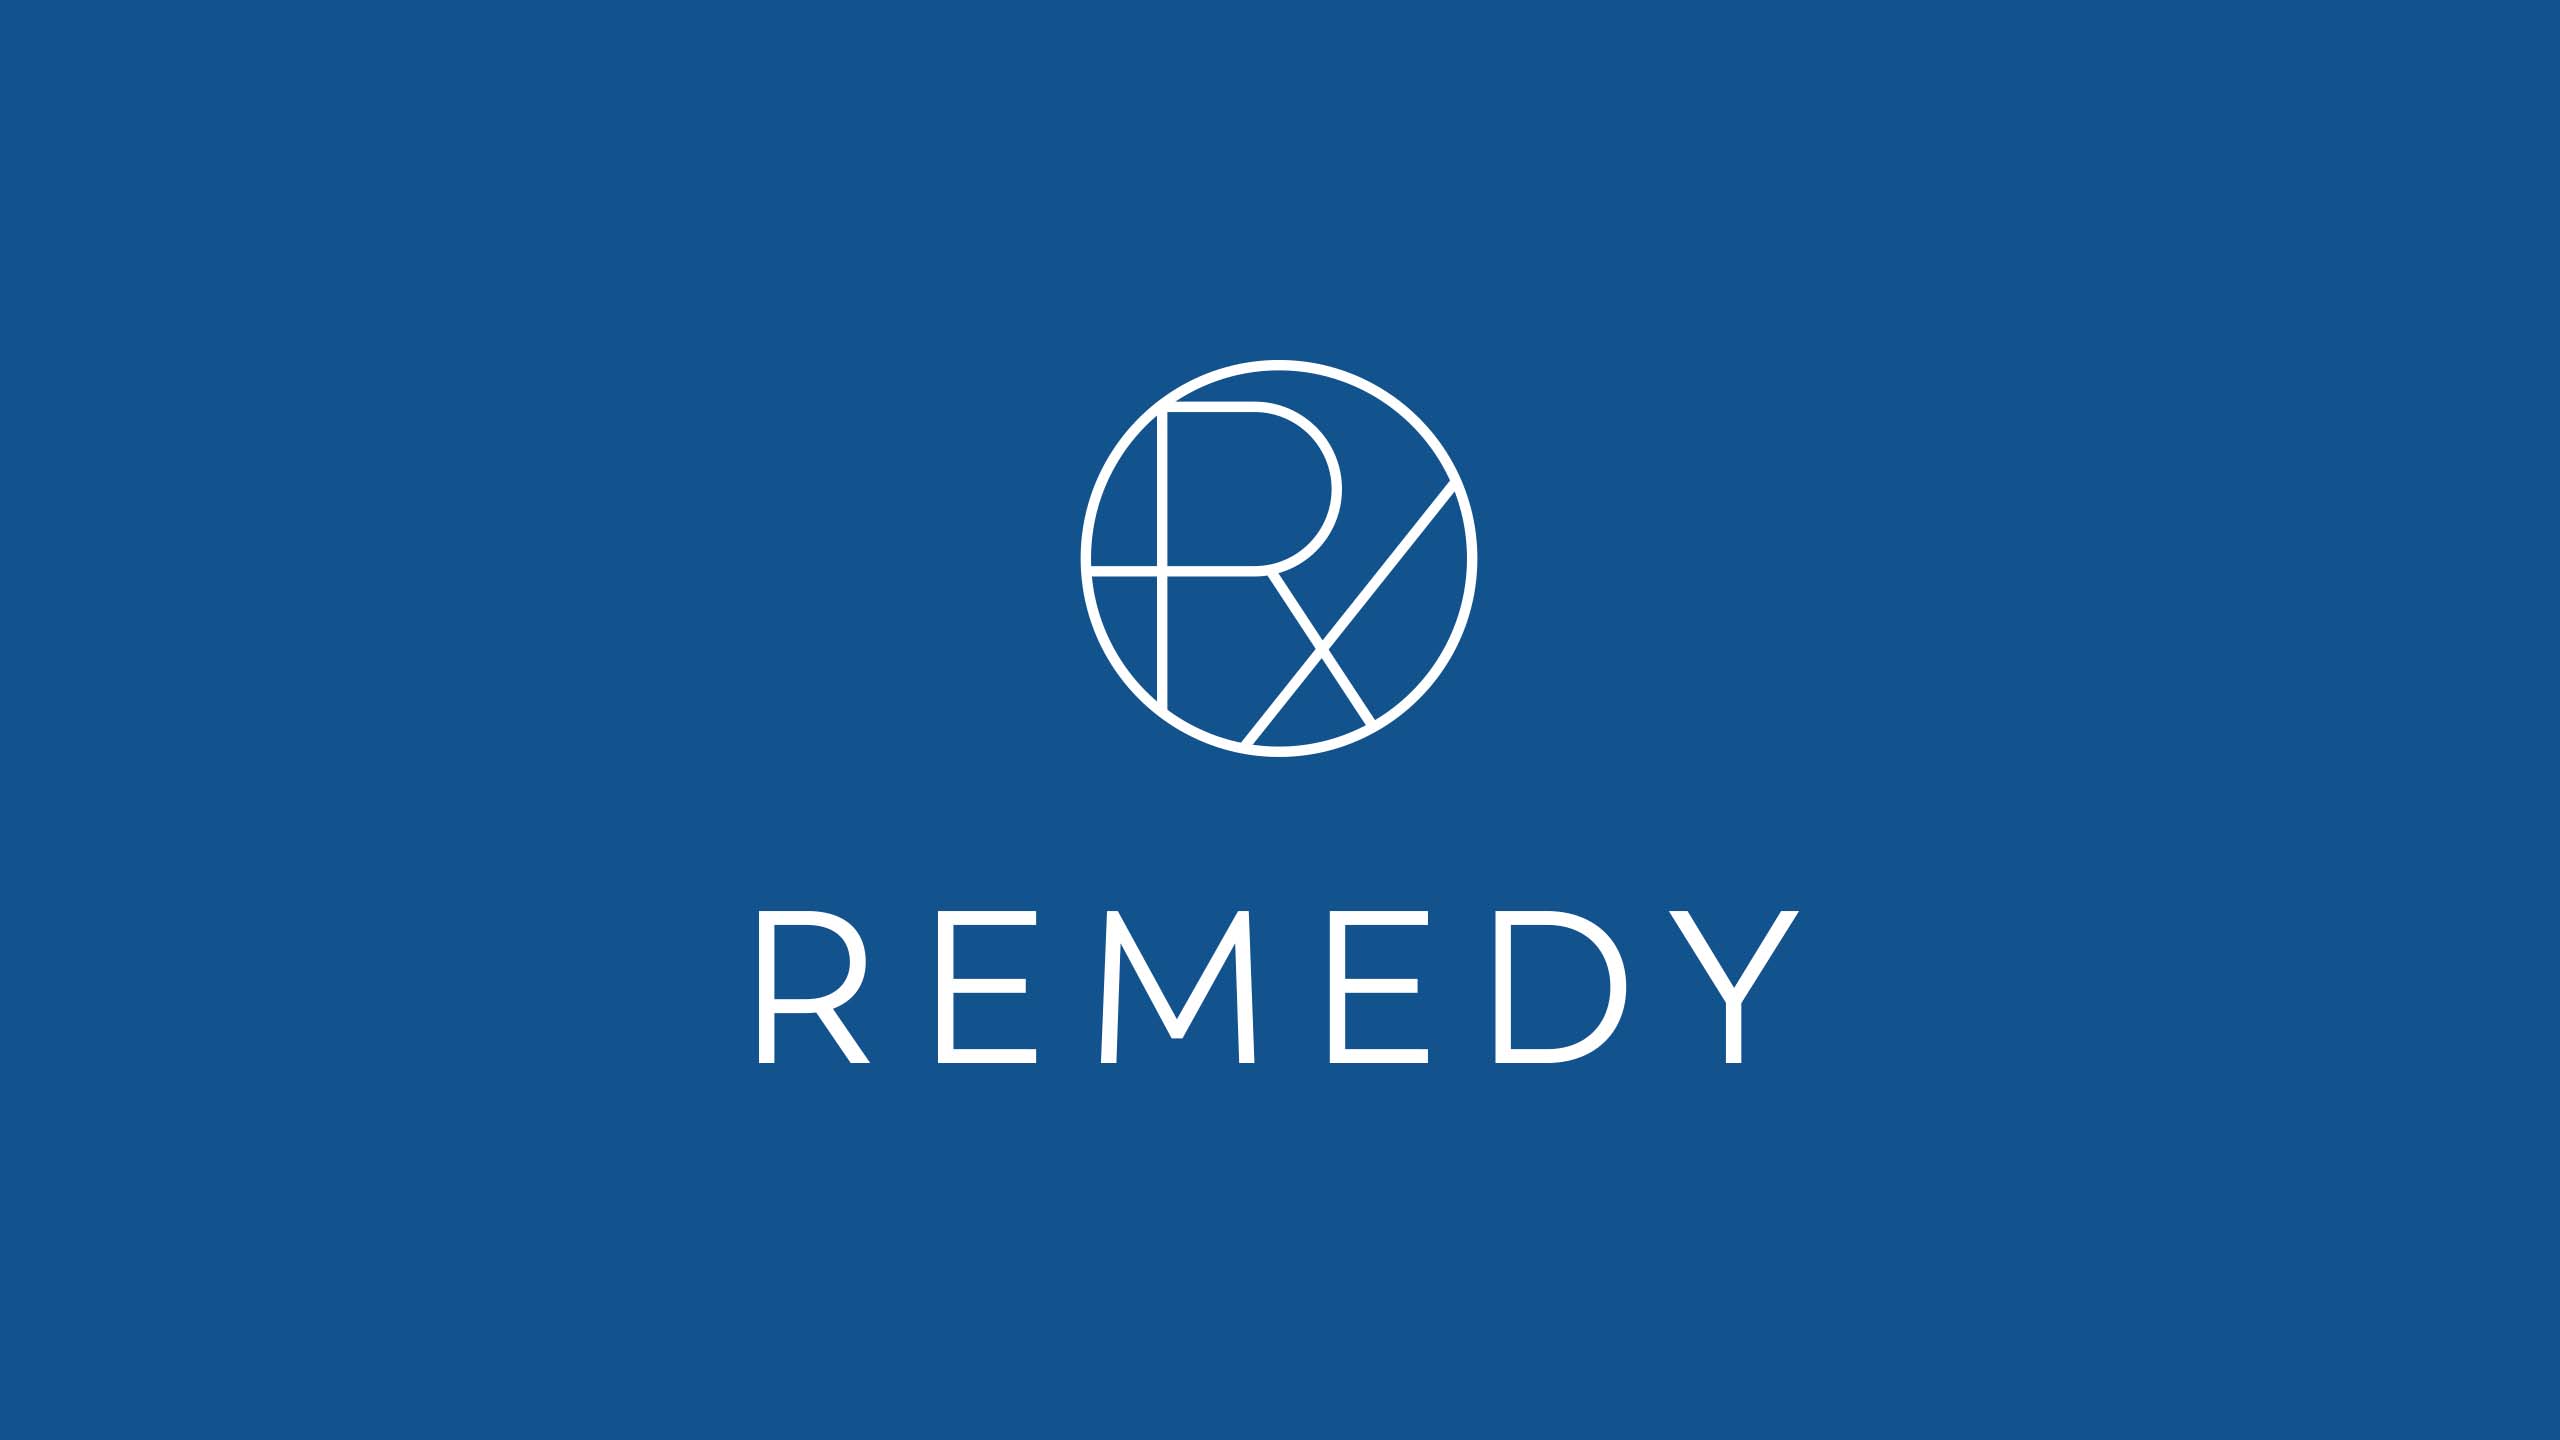 Blue and white logo and icon for dermatology clinic and brand Remedy Skin Solutions